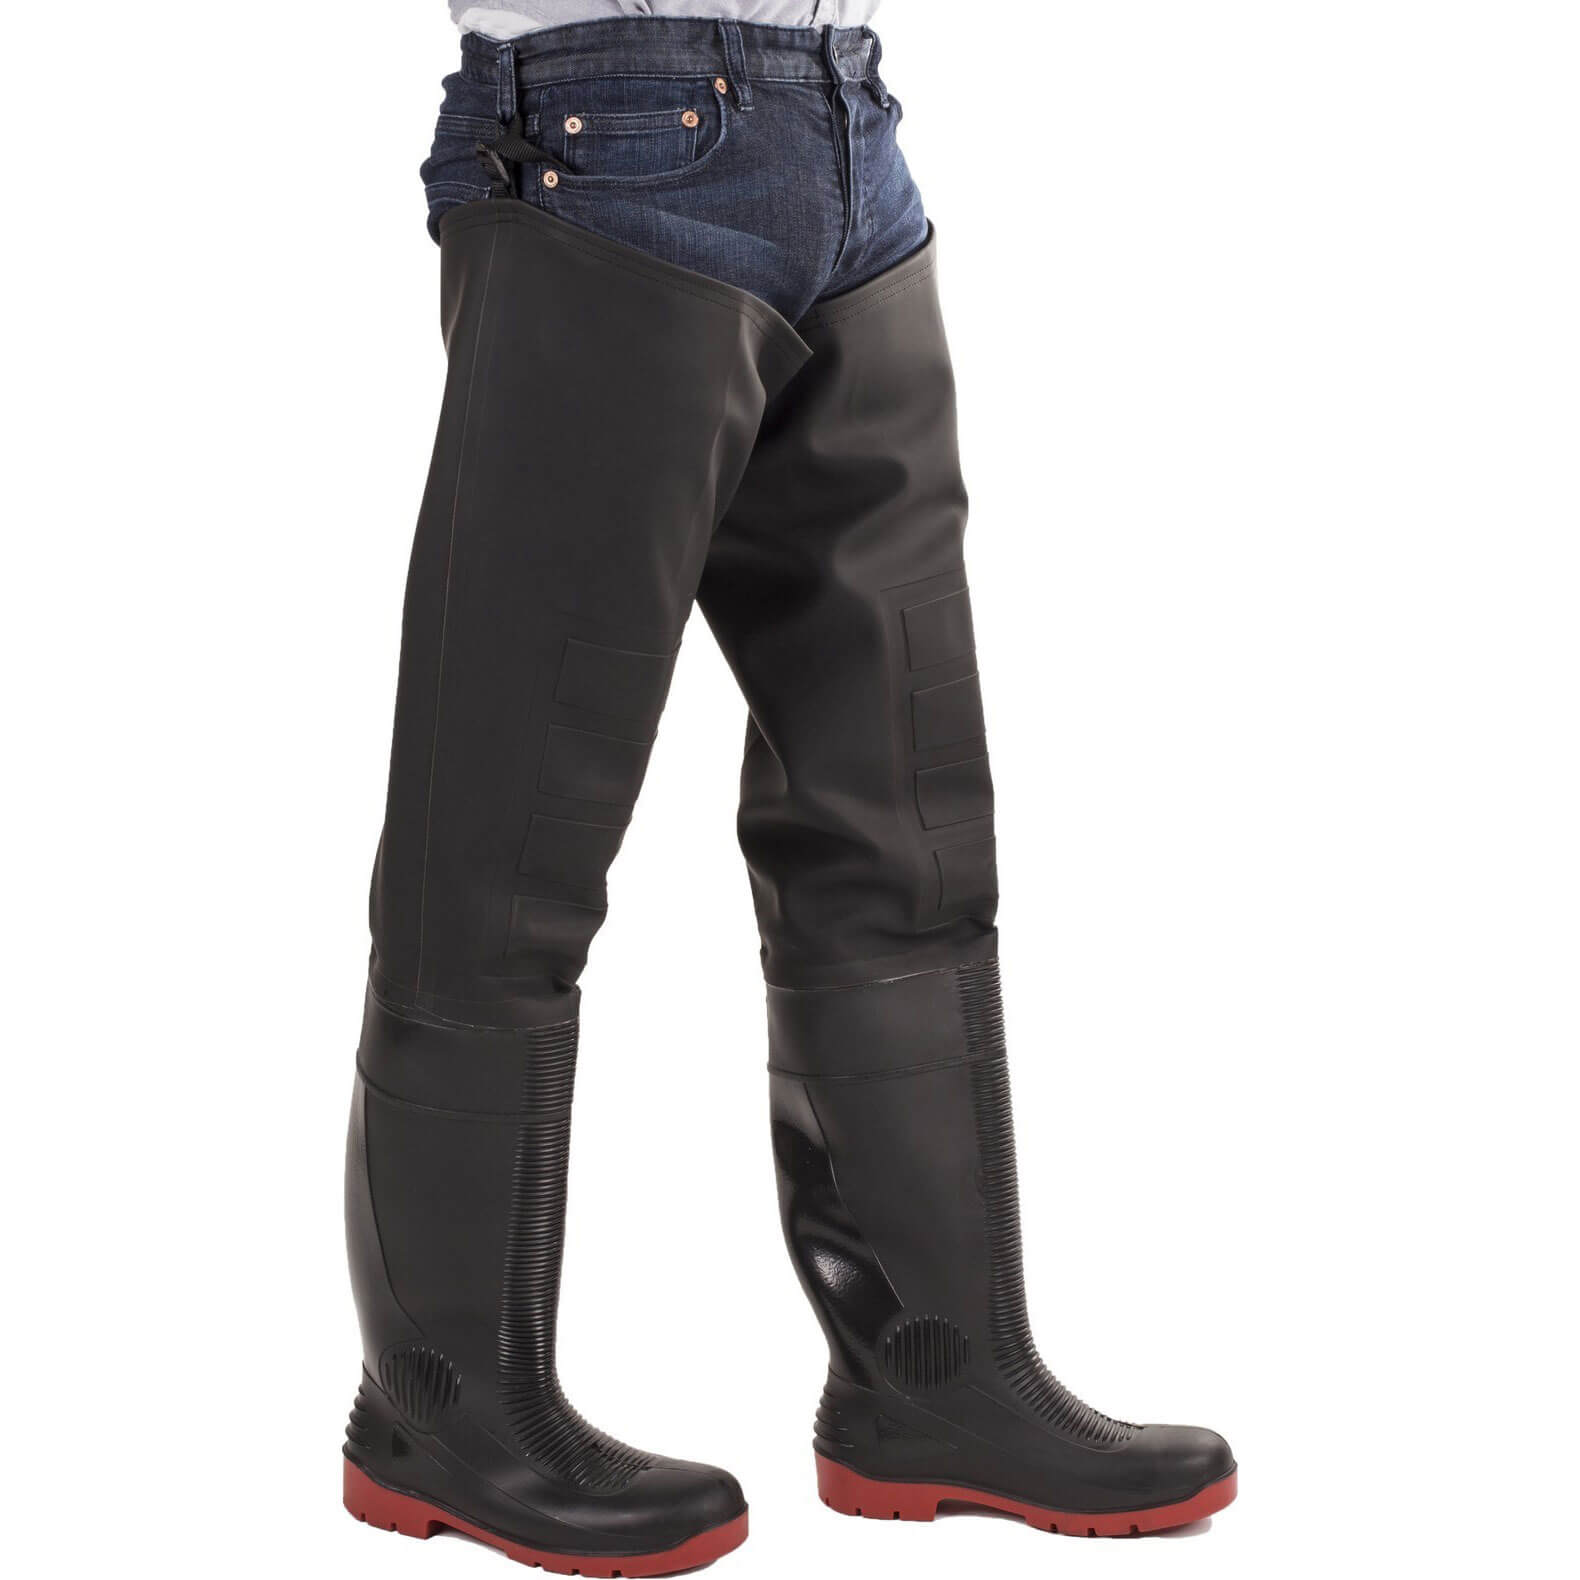 Image of Amblers Safety Rhone Thigh Safety Wader Black / Red Size 13